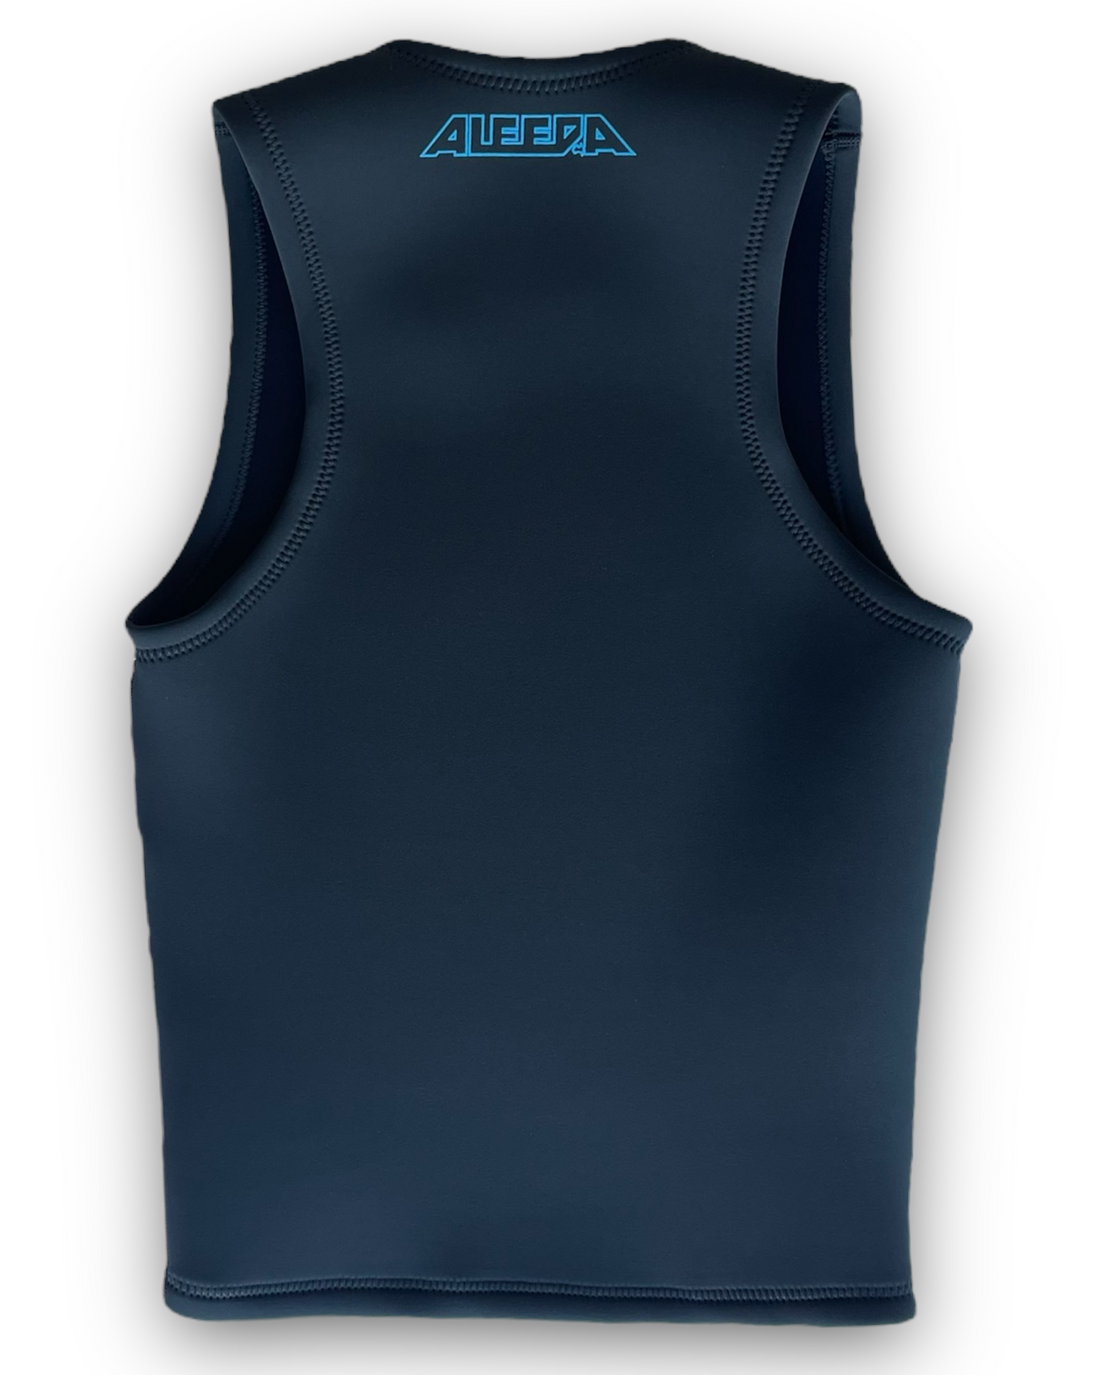 Wetsuit Singlet, Tank, 2mm, Mens, Adult , Charcoal - back flat lay